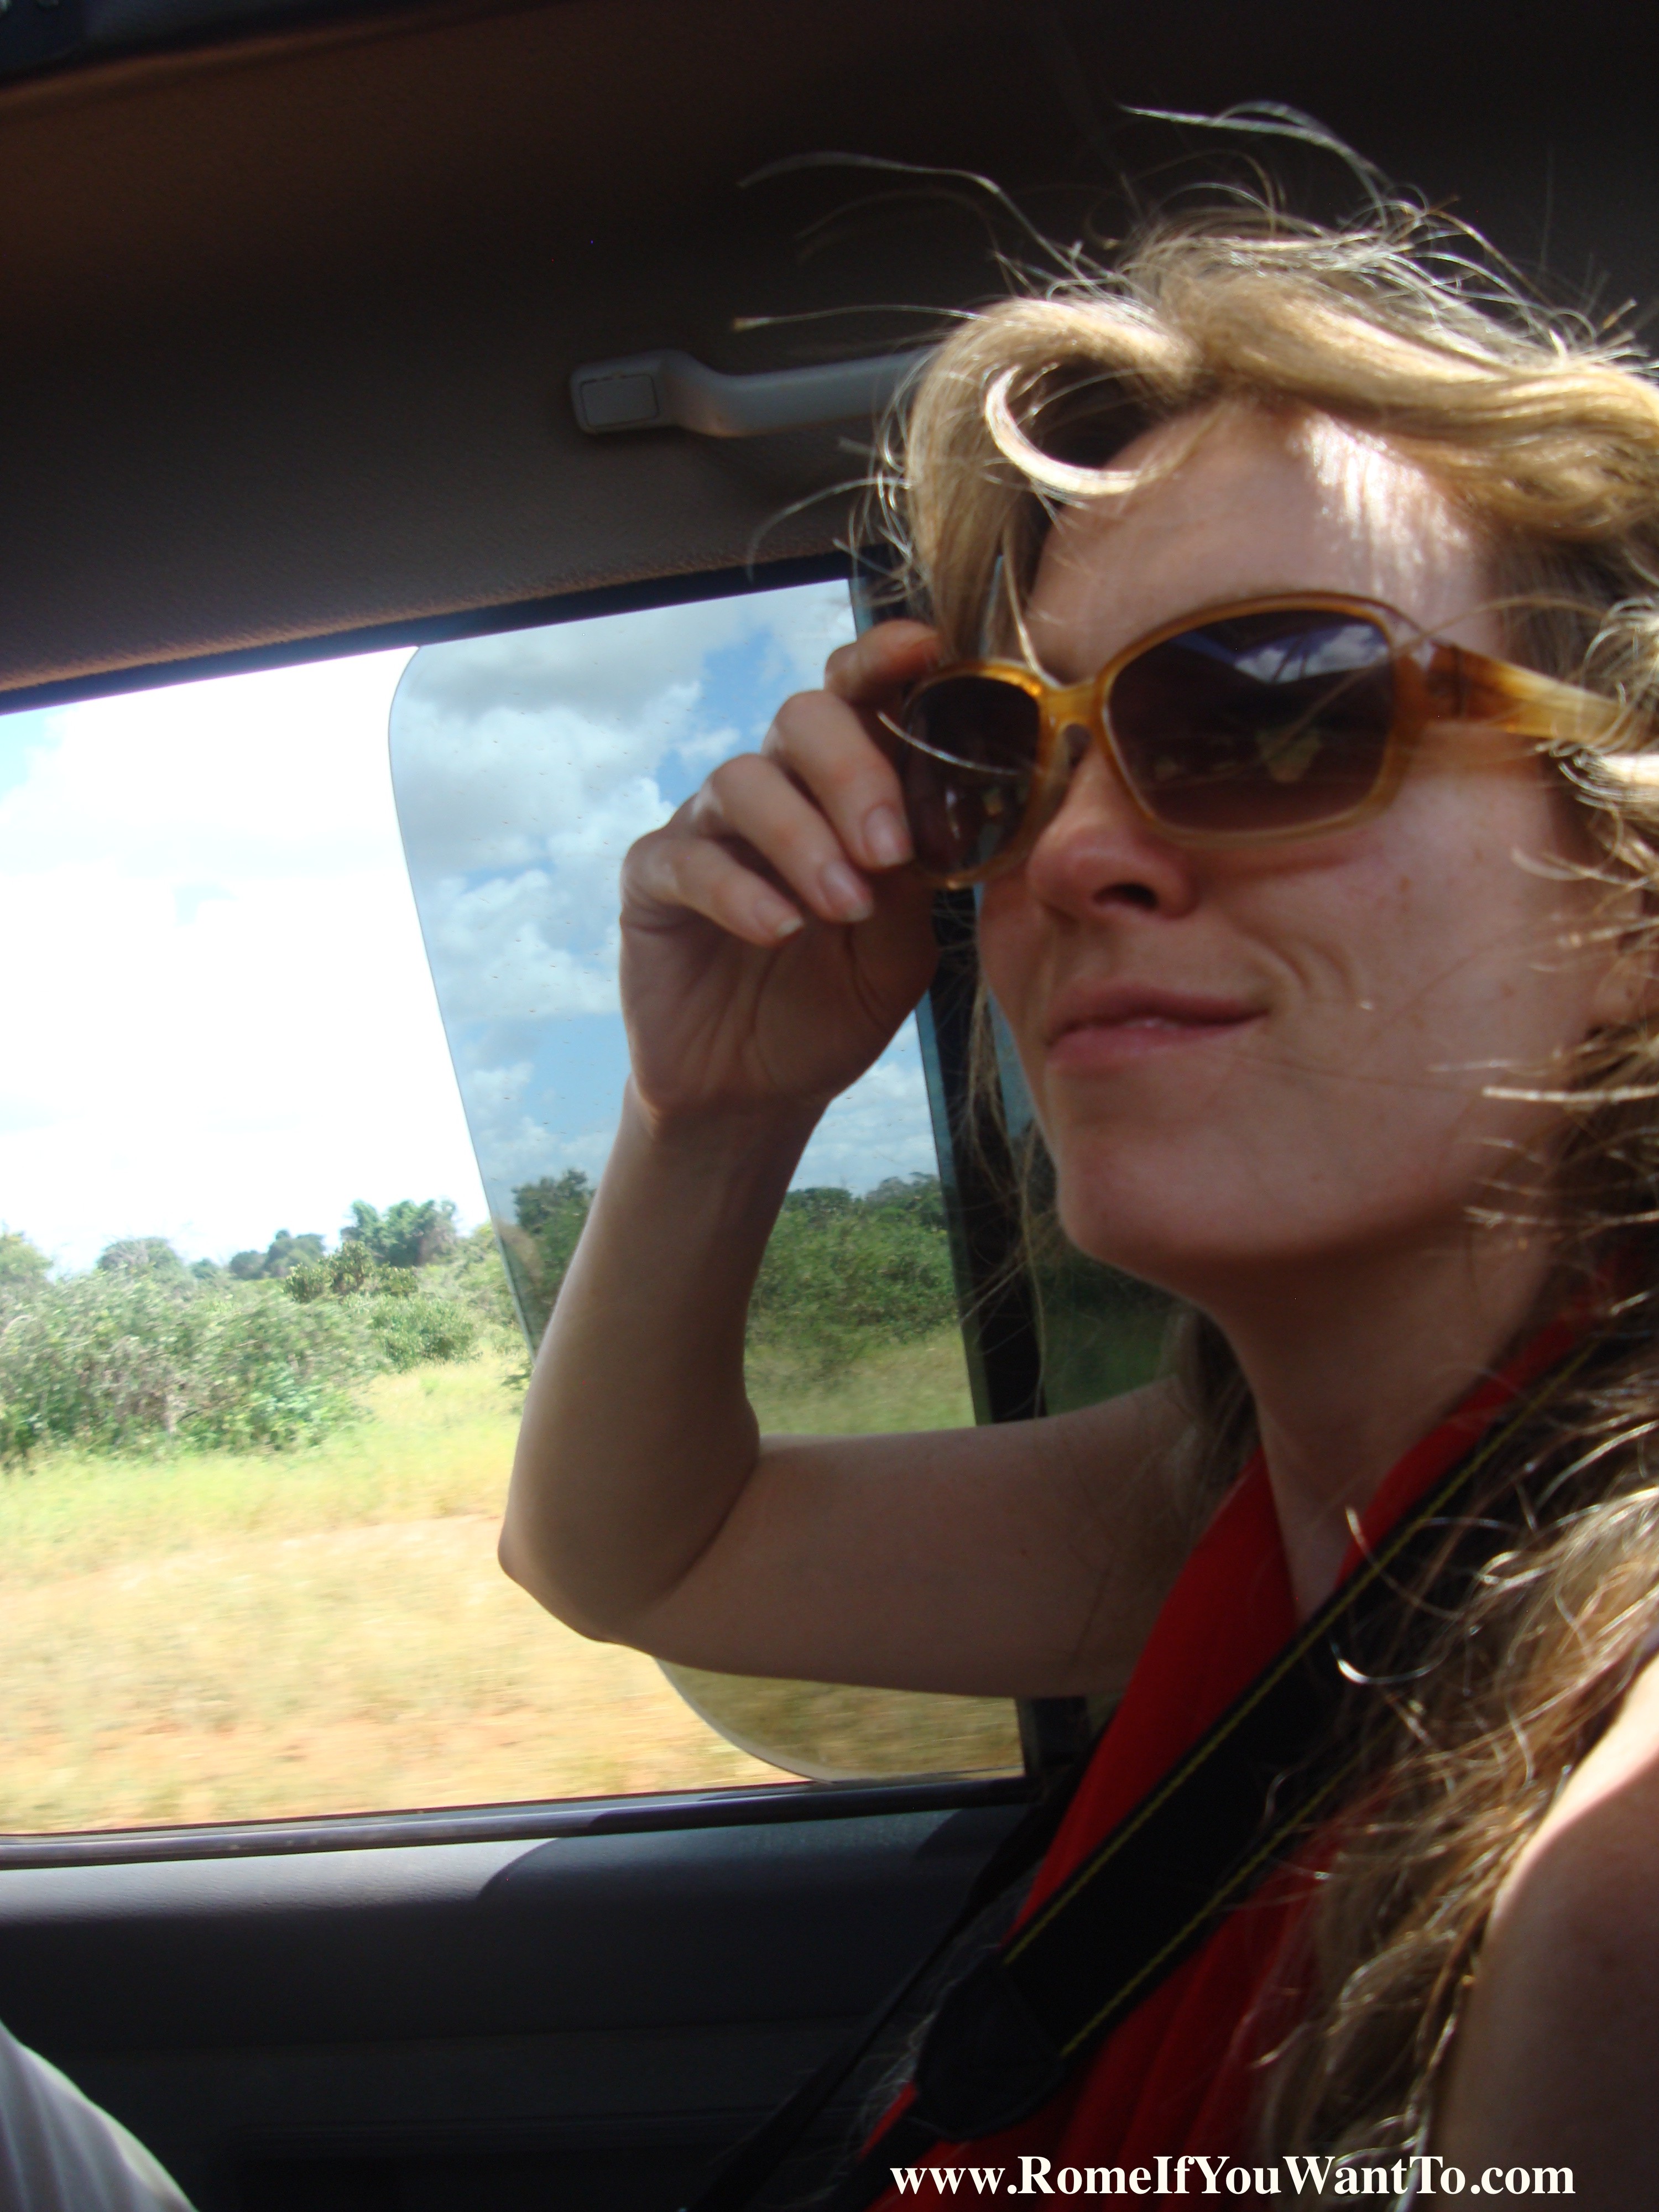 This is the moment I decided I shall return to Africa and do a safari right. Five minutes later, I was asleep.